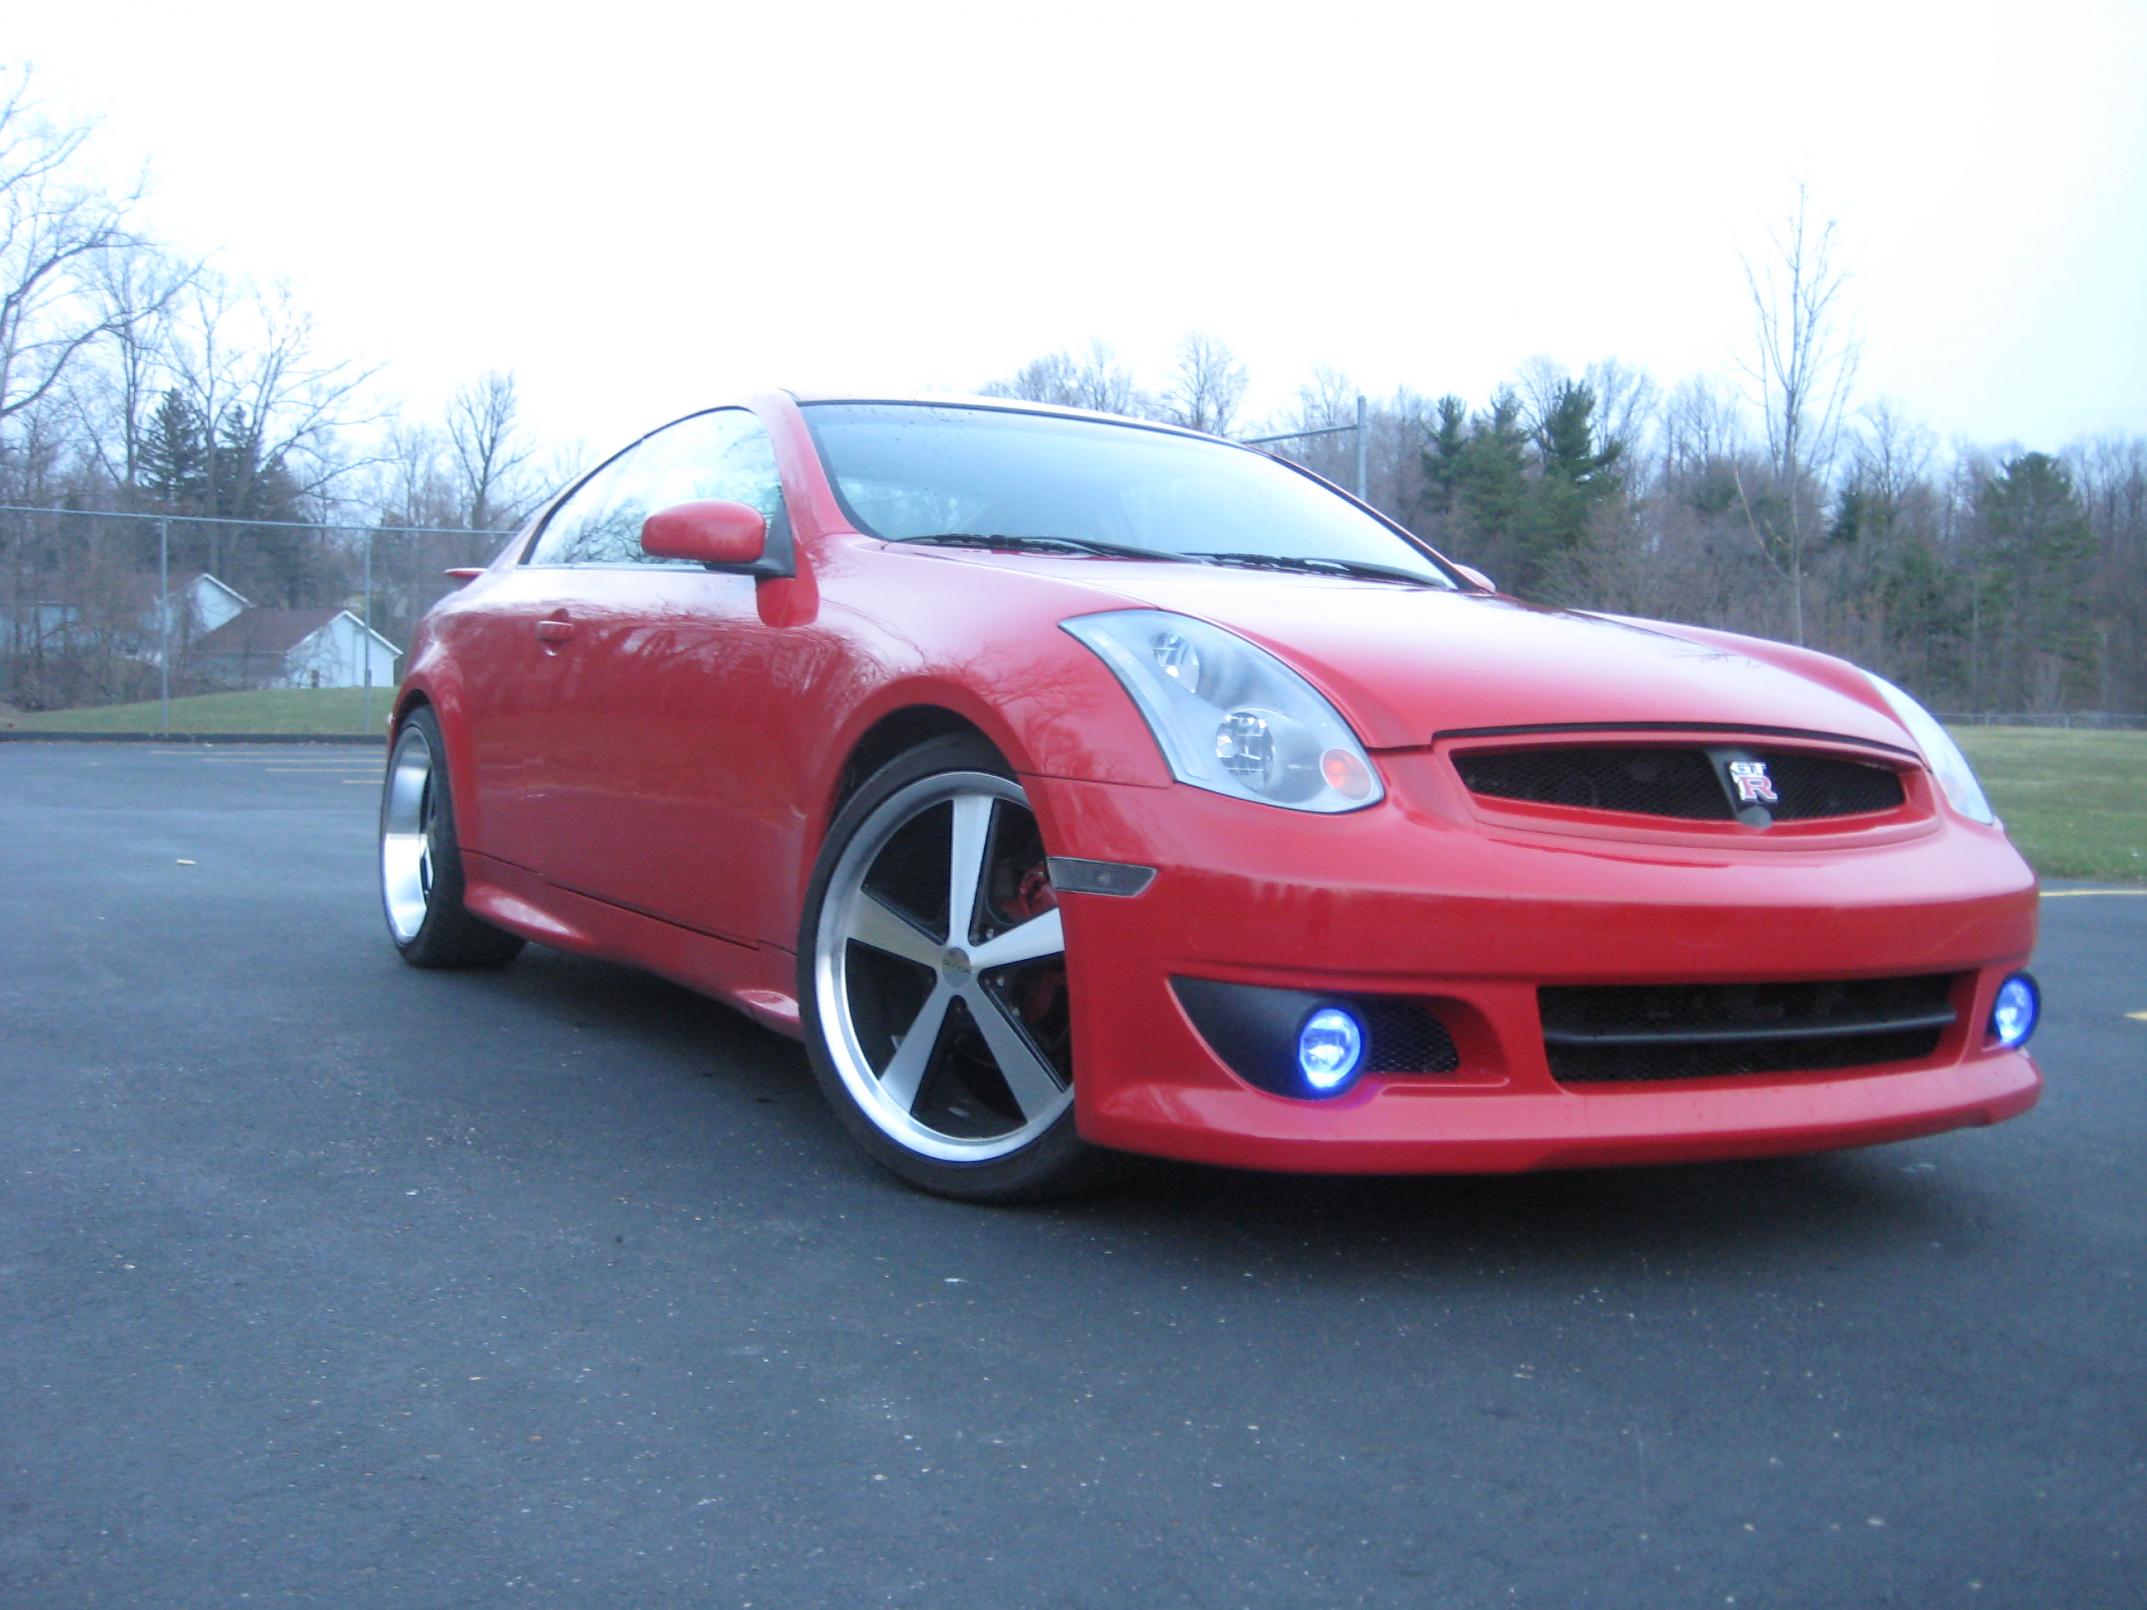 G35 coupe 20" rims kenstyle kit.